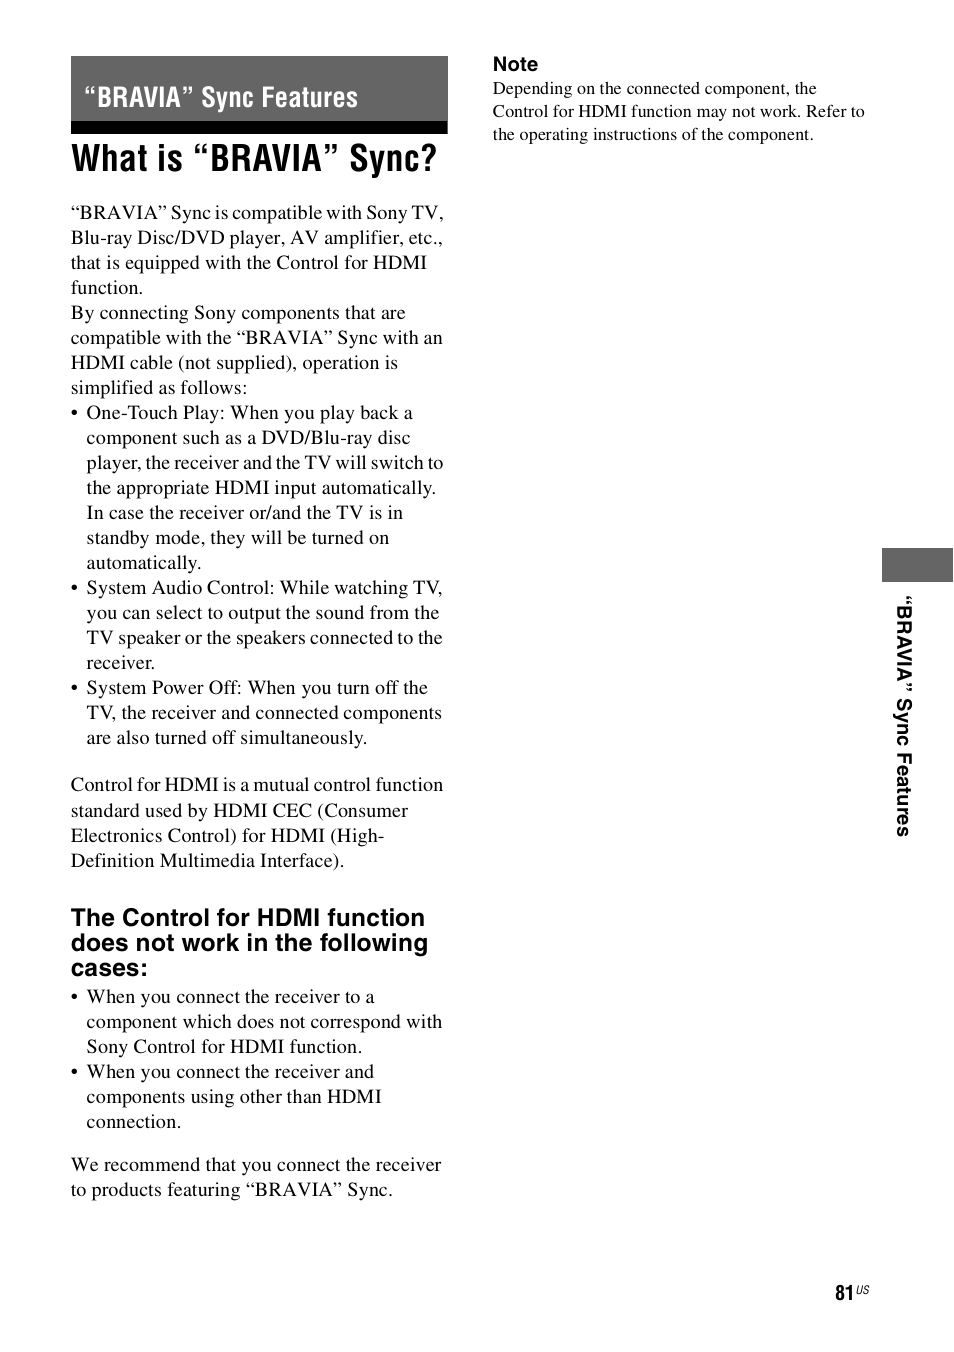 Bravia” sync features, What is “bravia” sync | Sony STR-DH800 User Manual |  Page 81 / 124